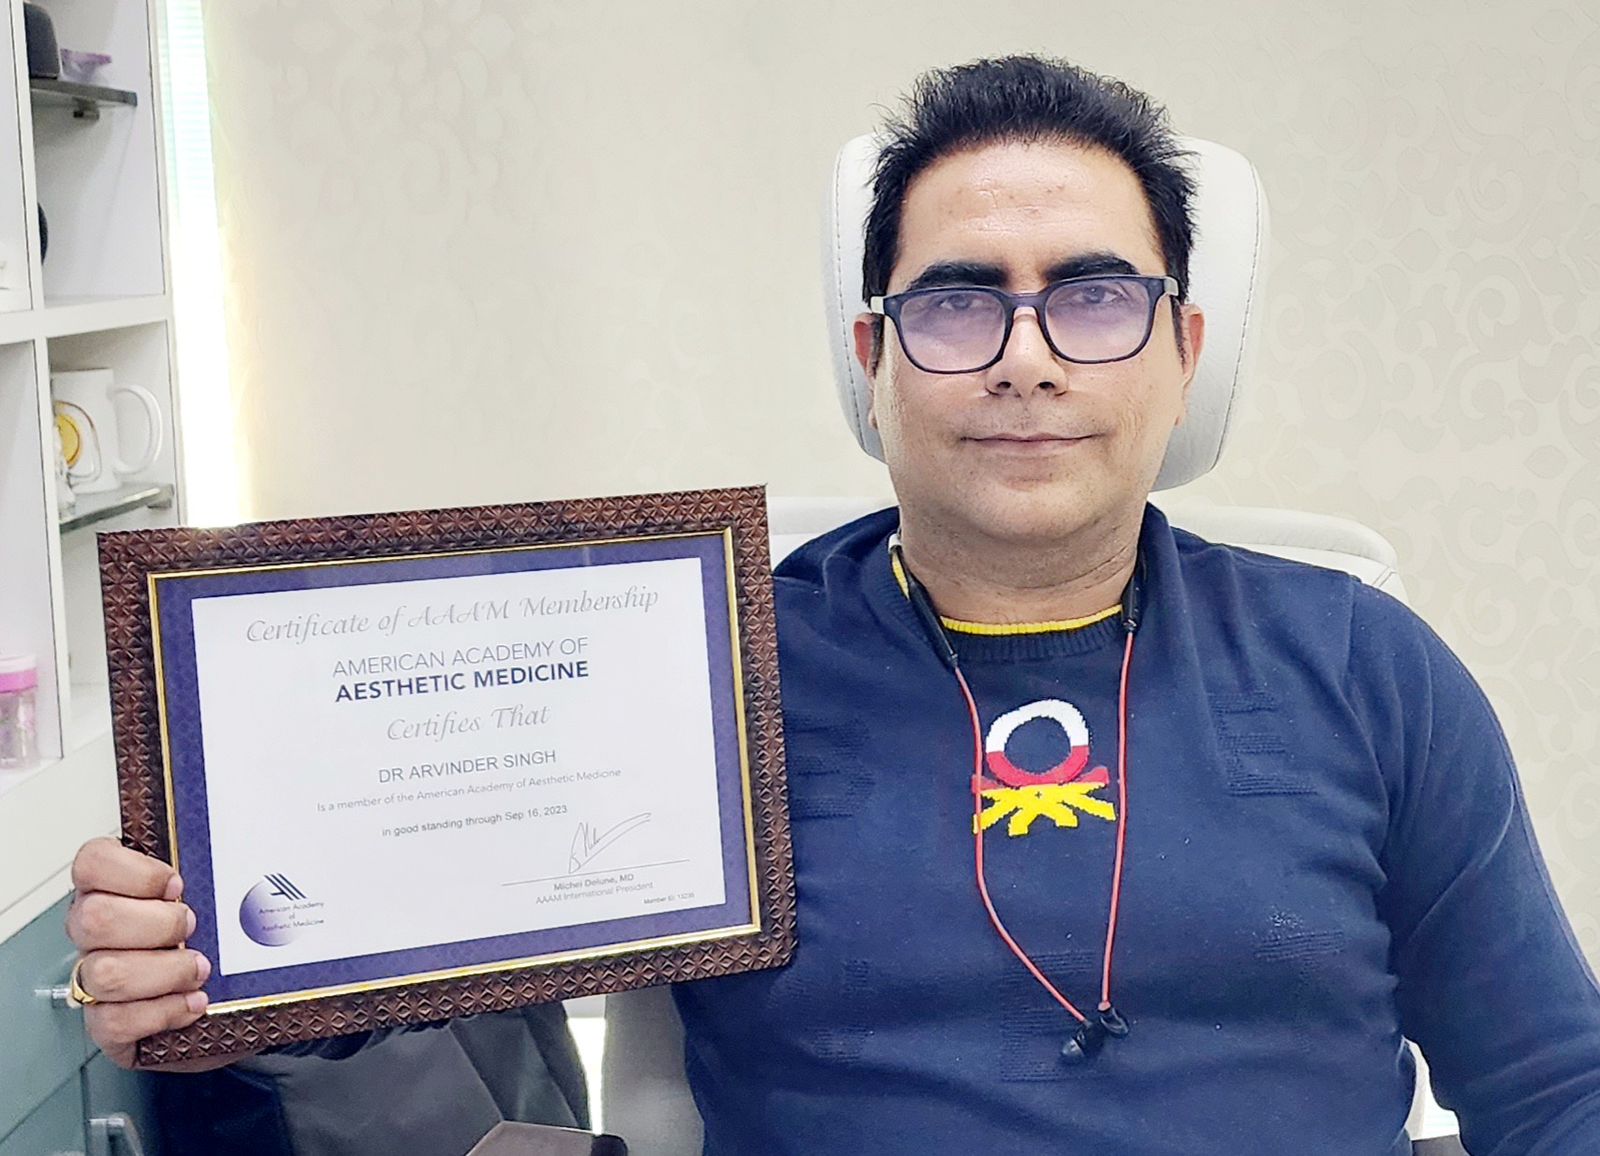 Dr. Arvinder Singh conferred with the prestigious American Association of Aesthetic Medicine